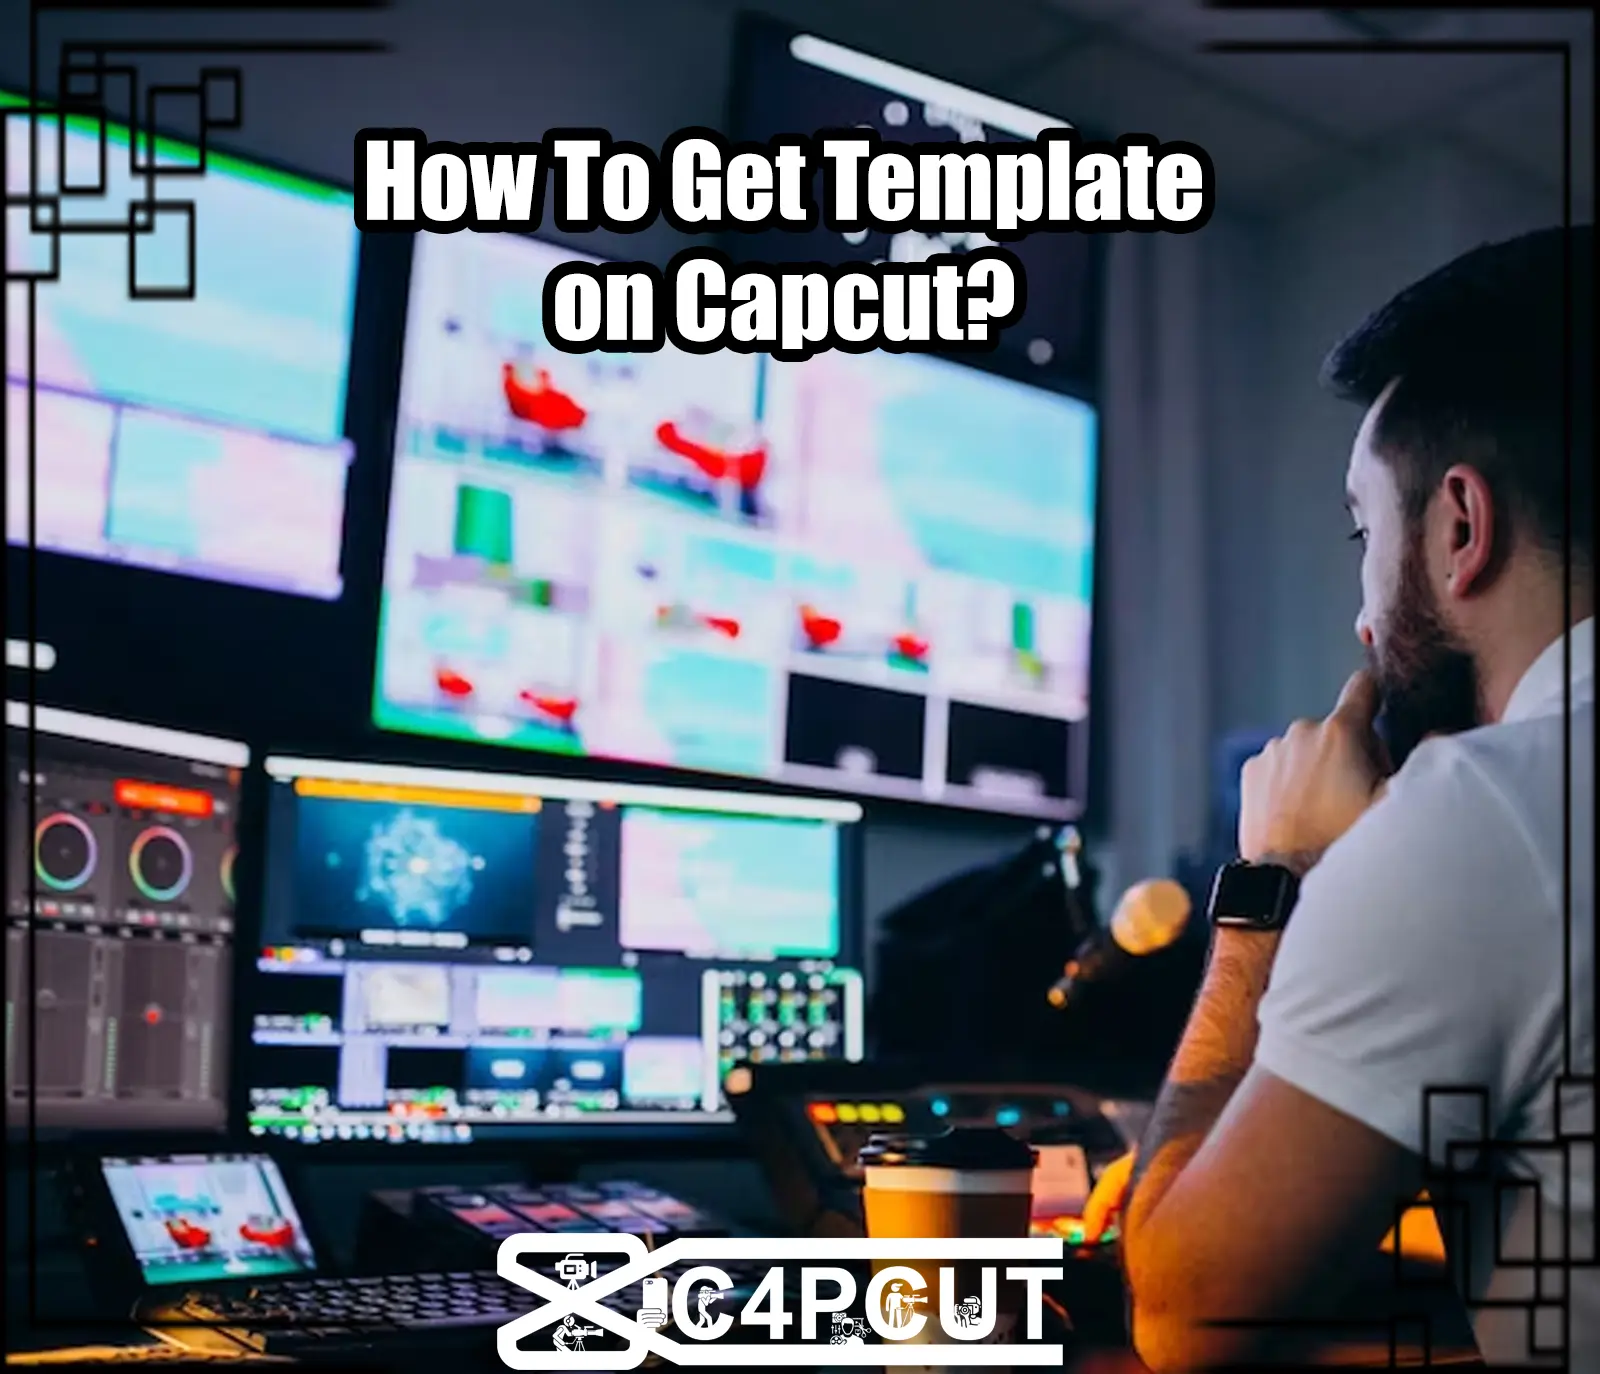 How To Get Template on Capcut?